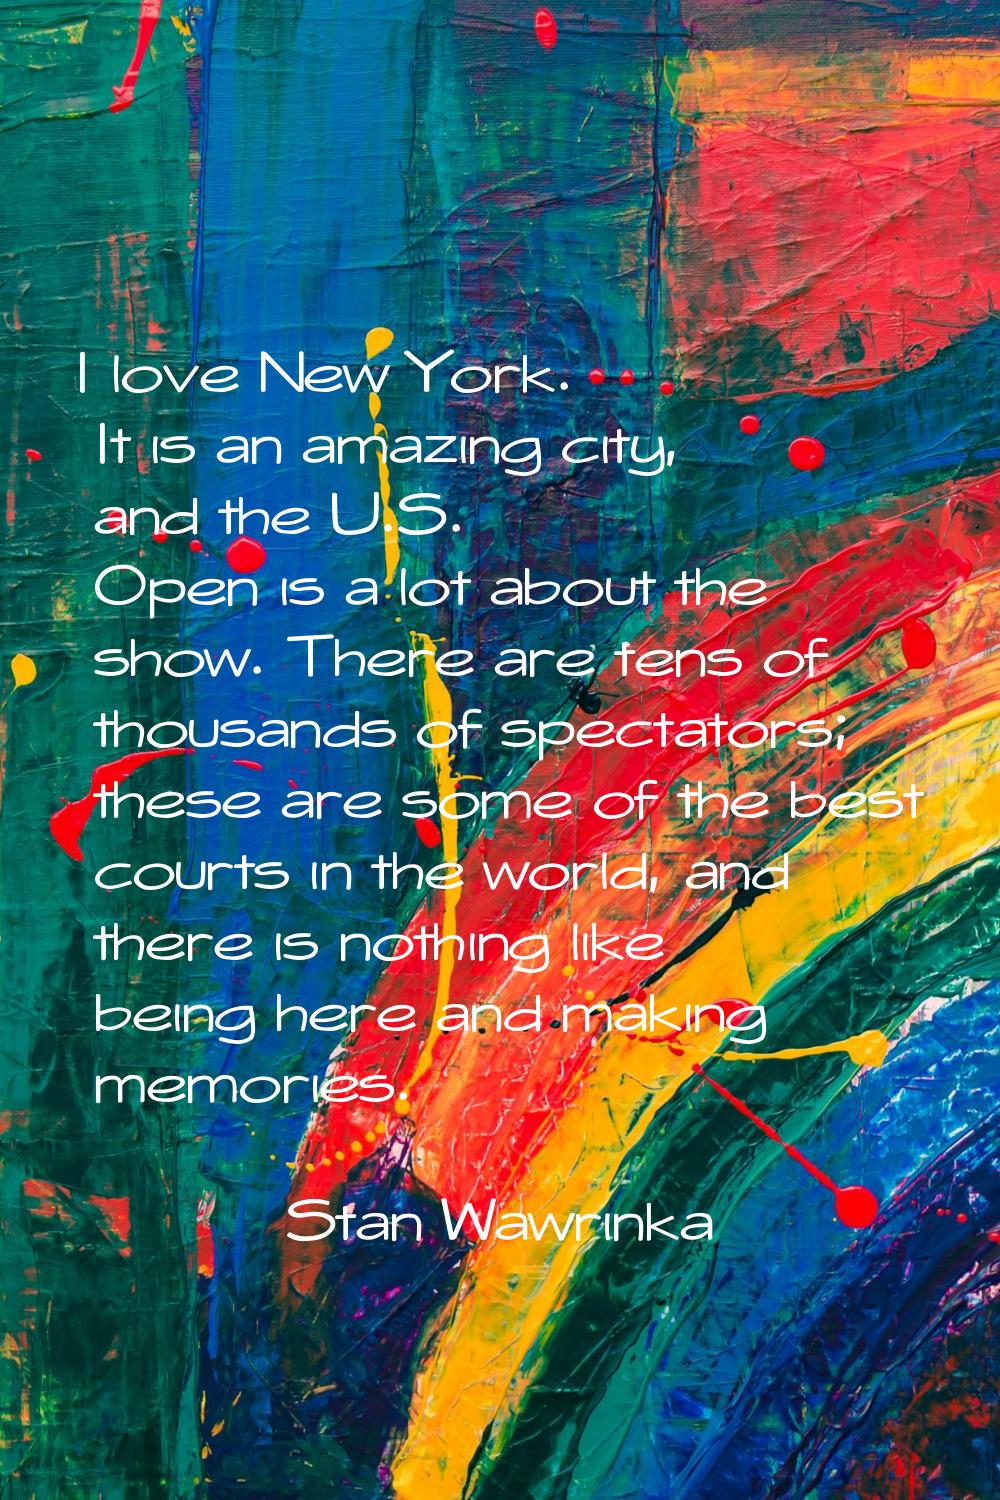 I love New York. It is an amazing city, and the U.S. Open is a lot about the show. There are tens o